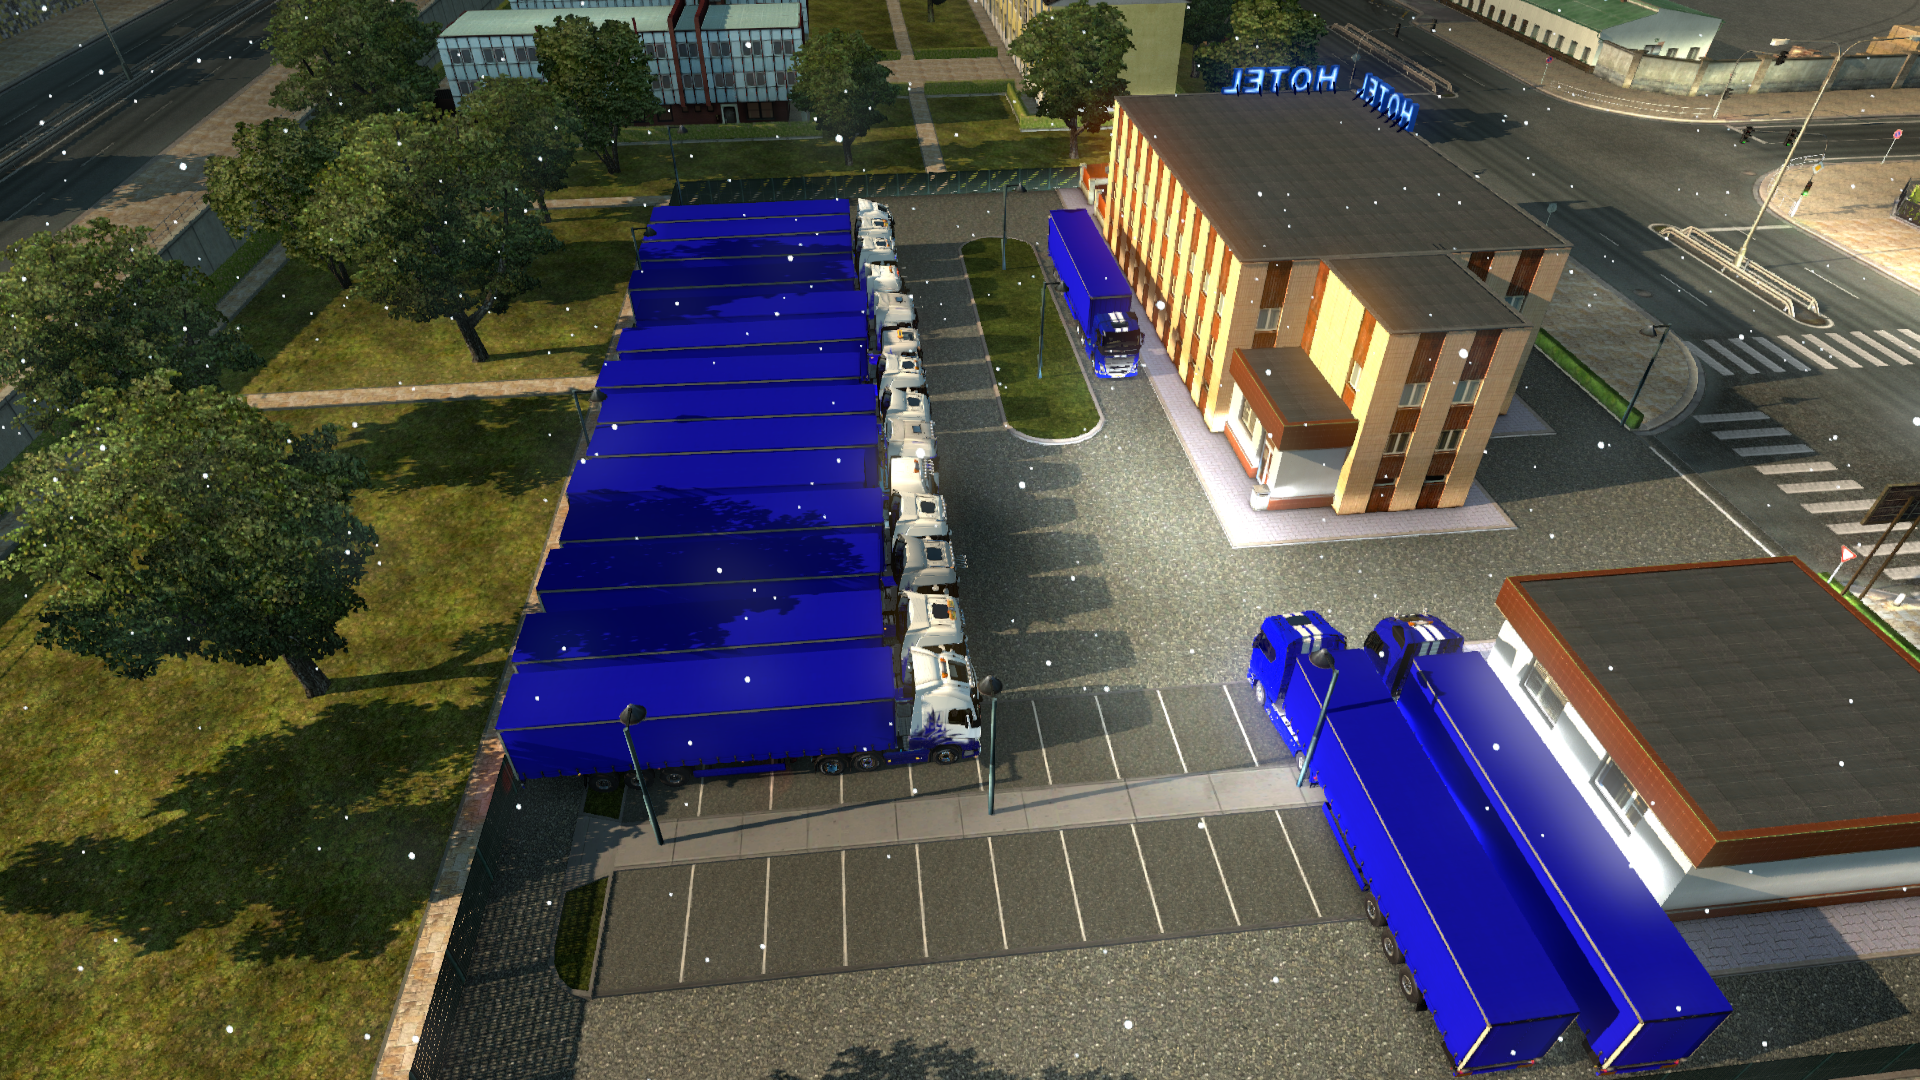 ets2_00145.png